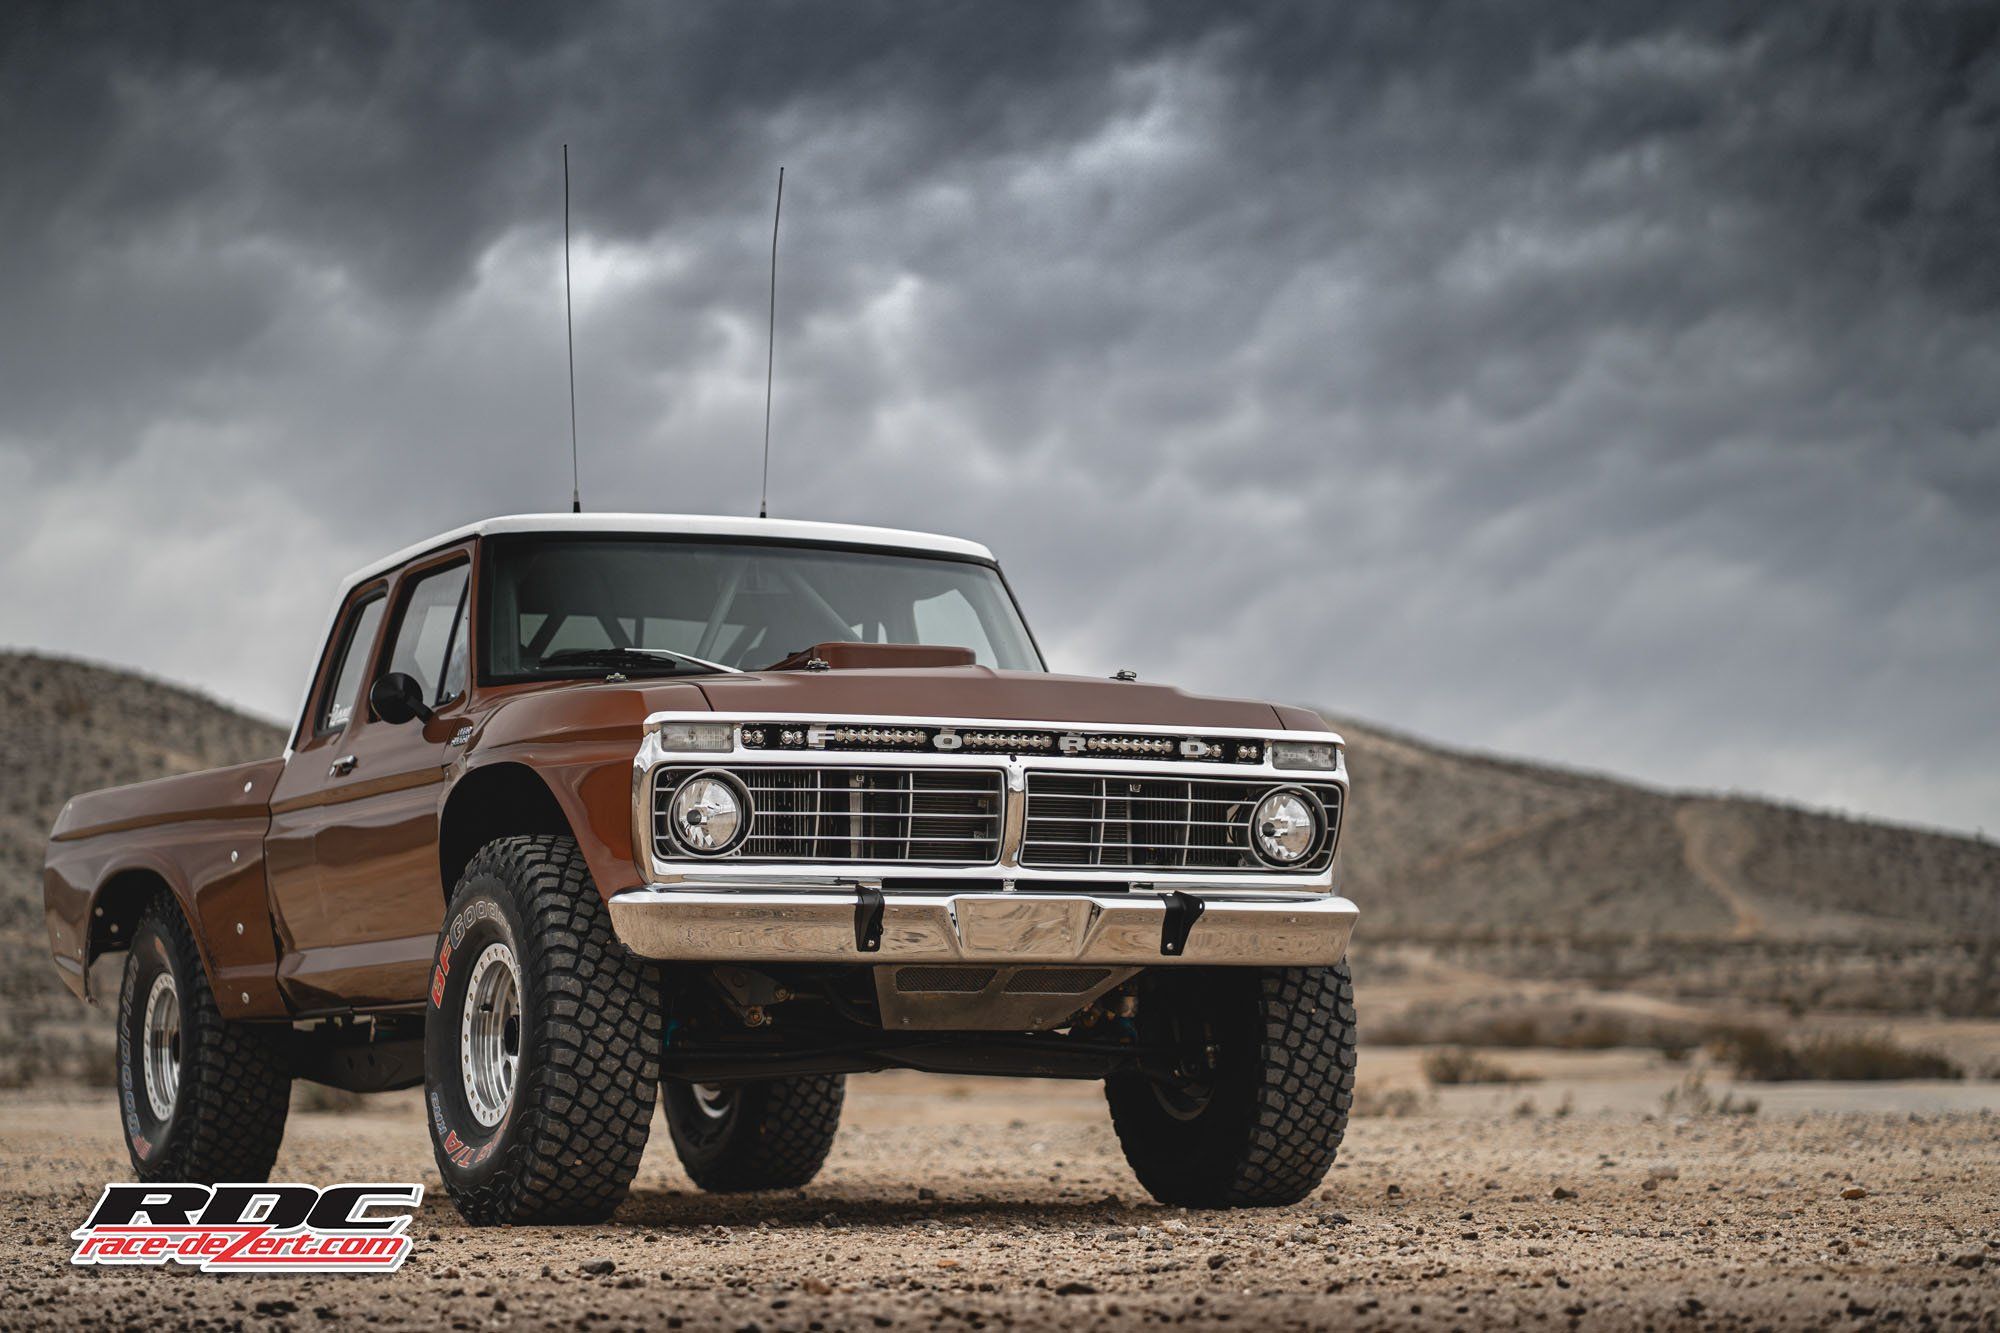 The Craft F100: A Classic Prerunner with Trophy Truck Chops. Trophy truck, Trucks, Ford trucks